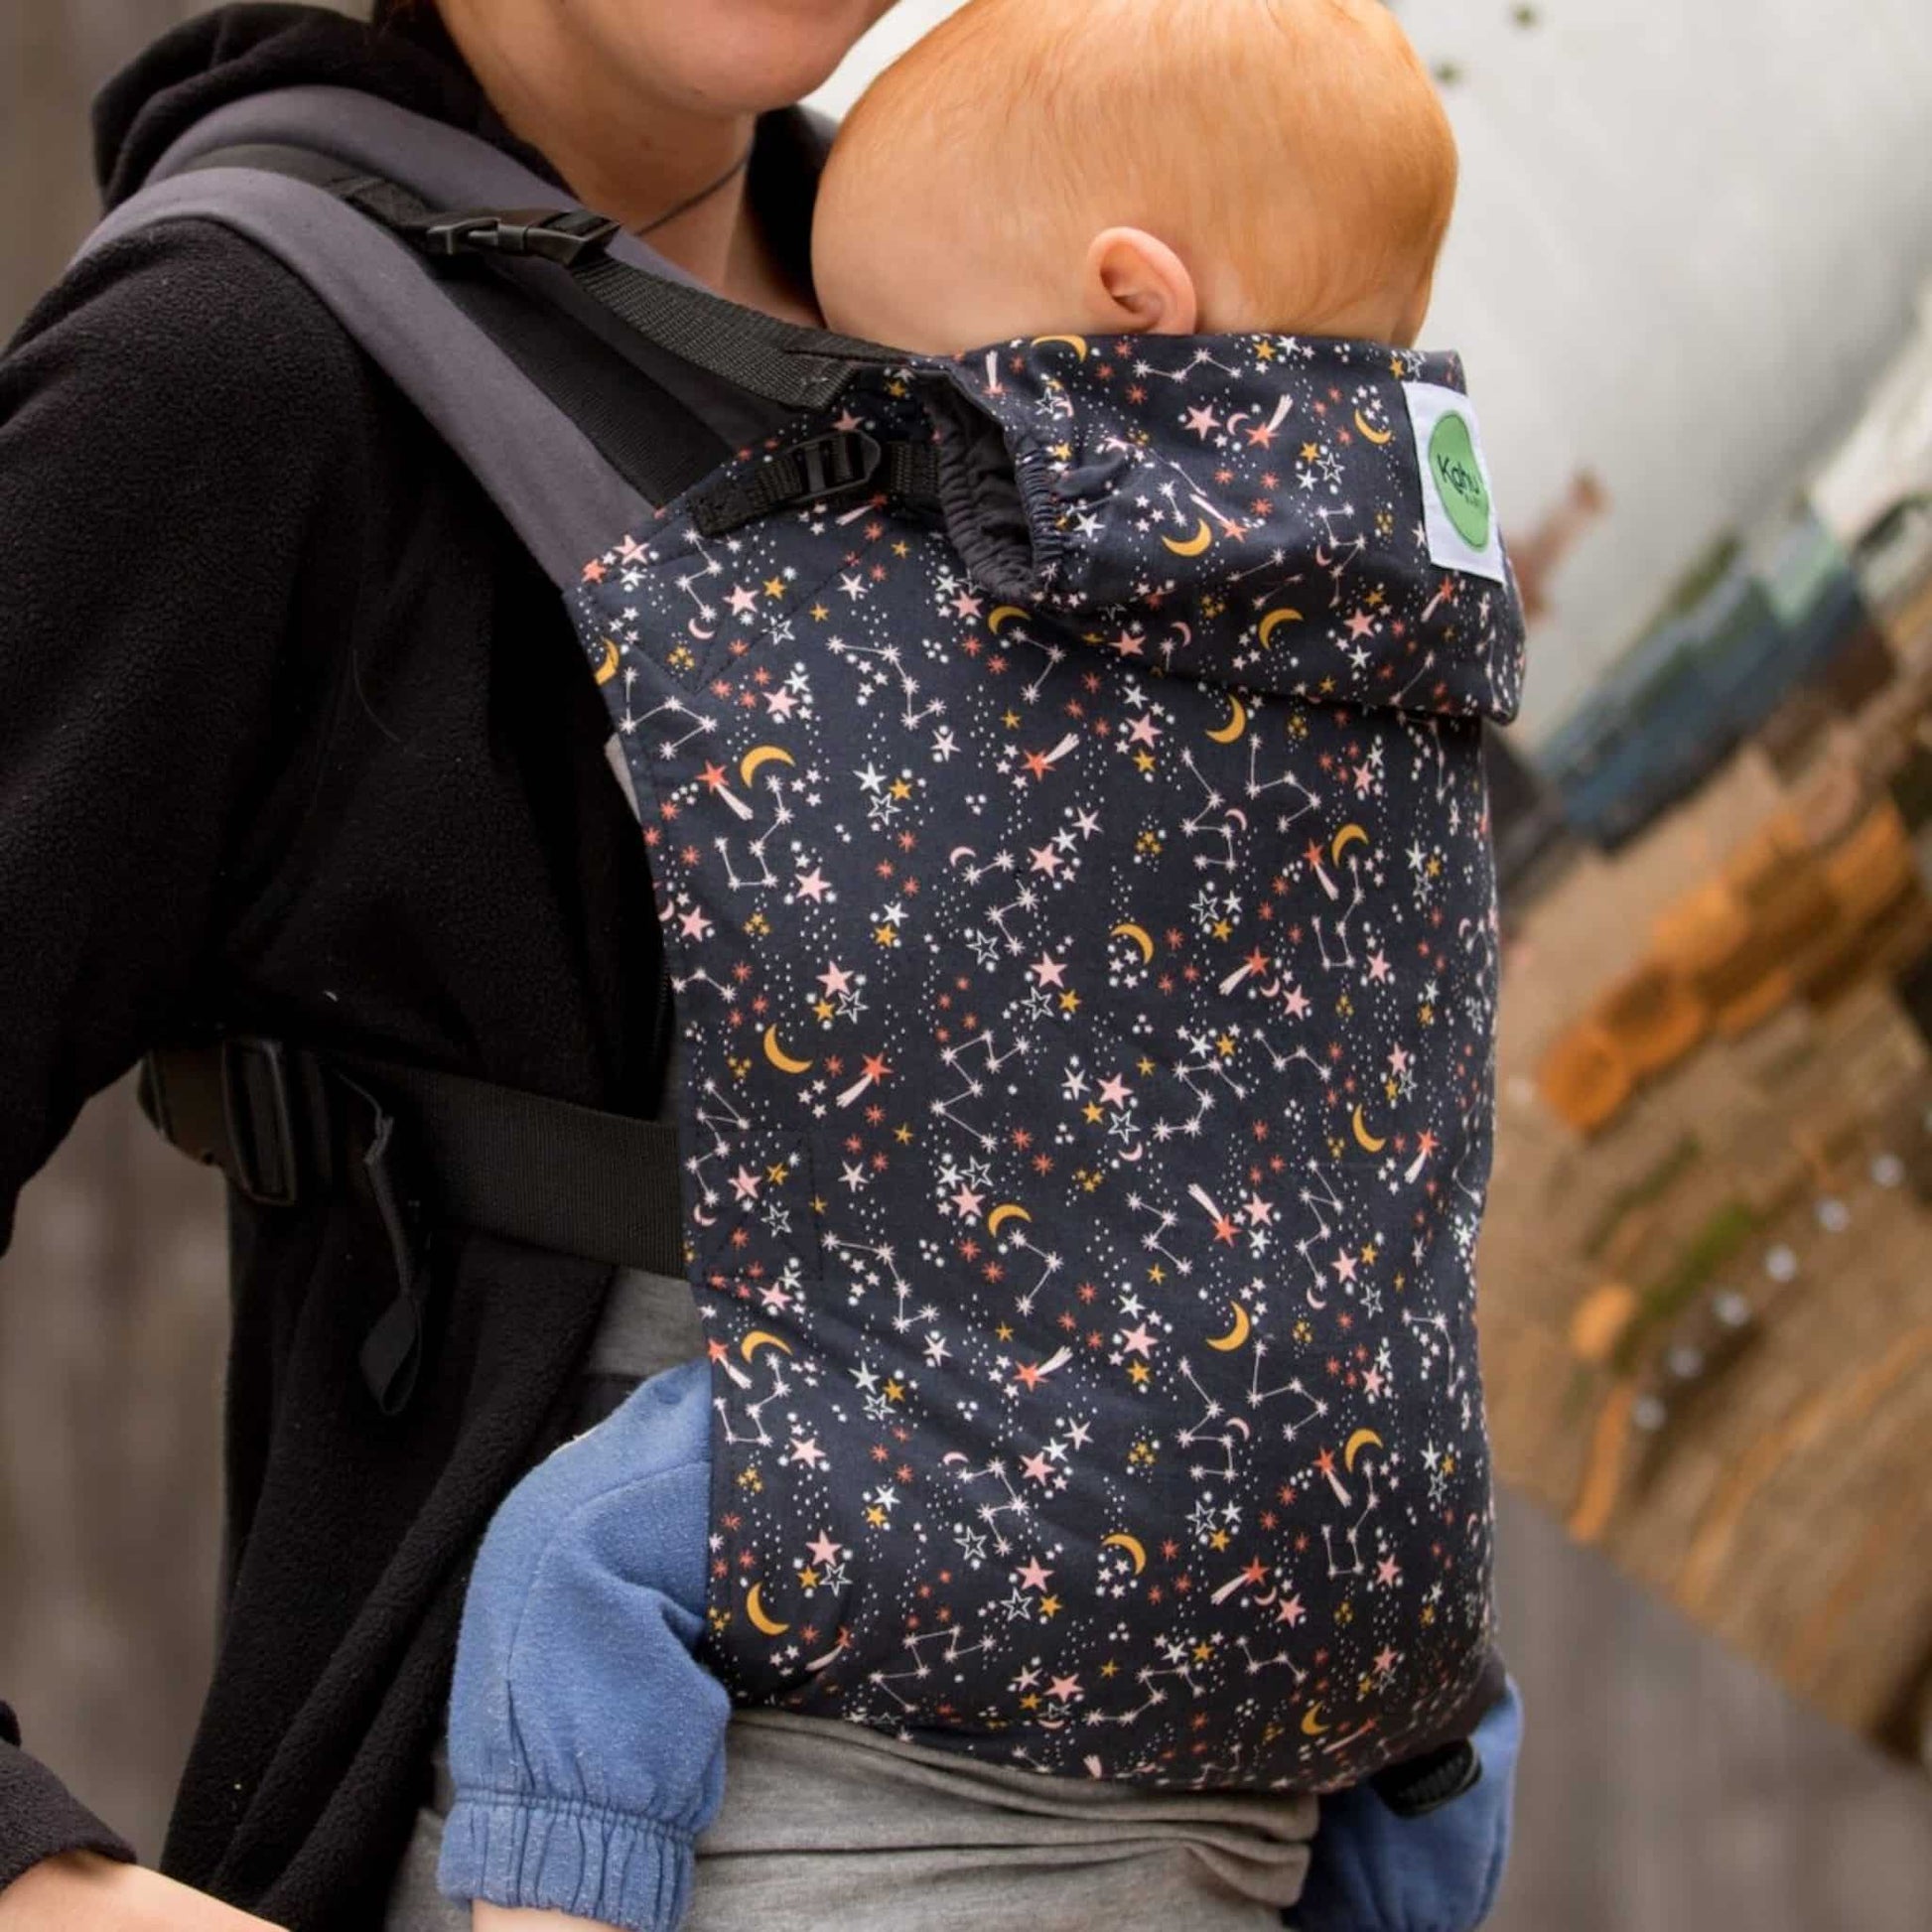 KahuBaby Baby Carrier Under the Stars